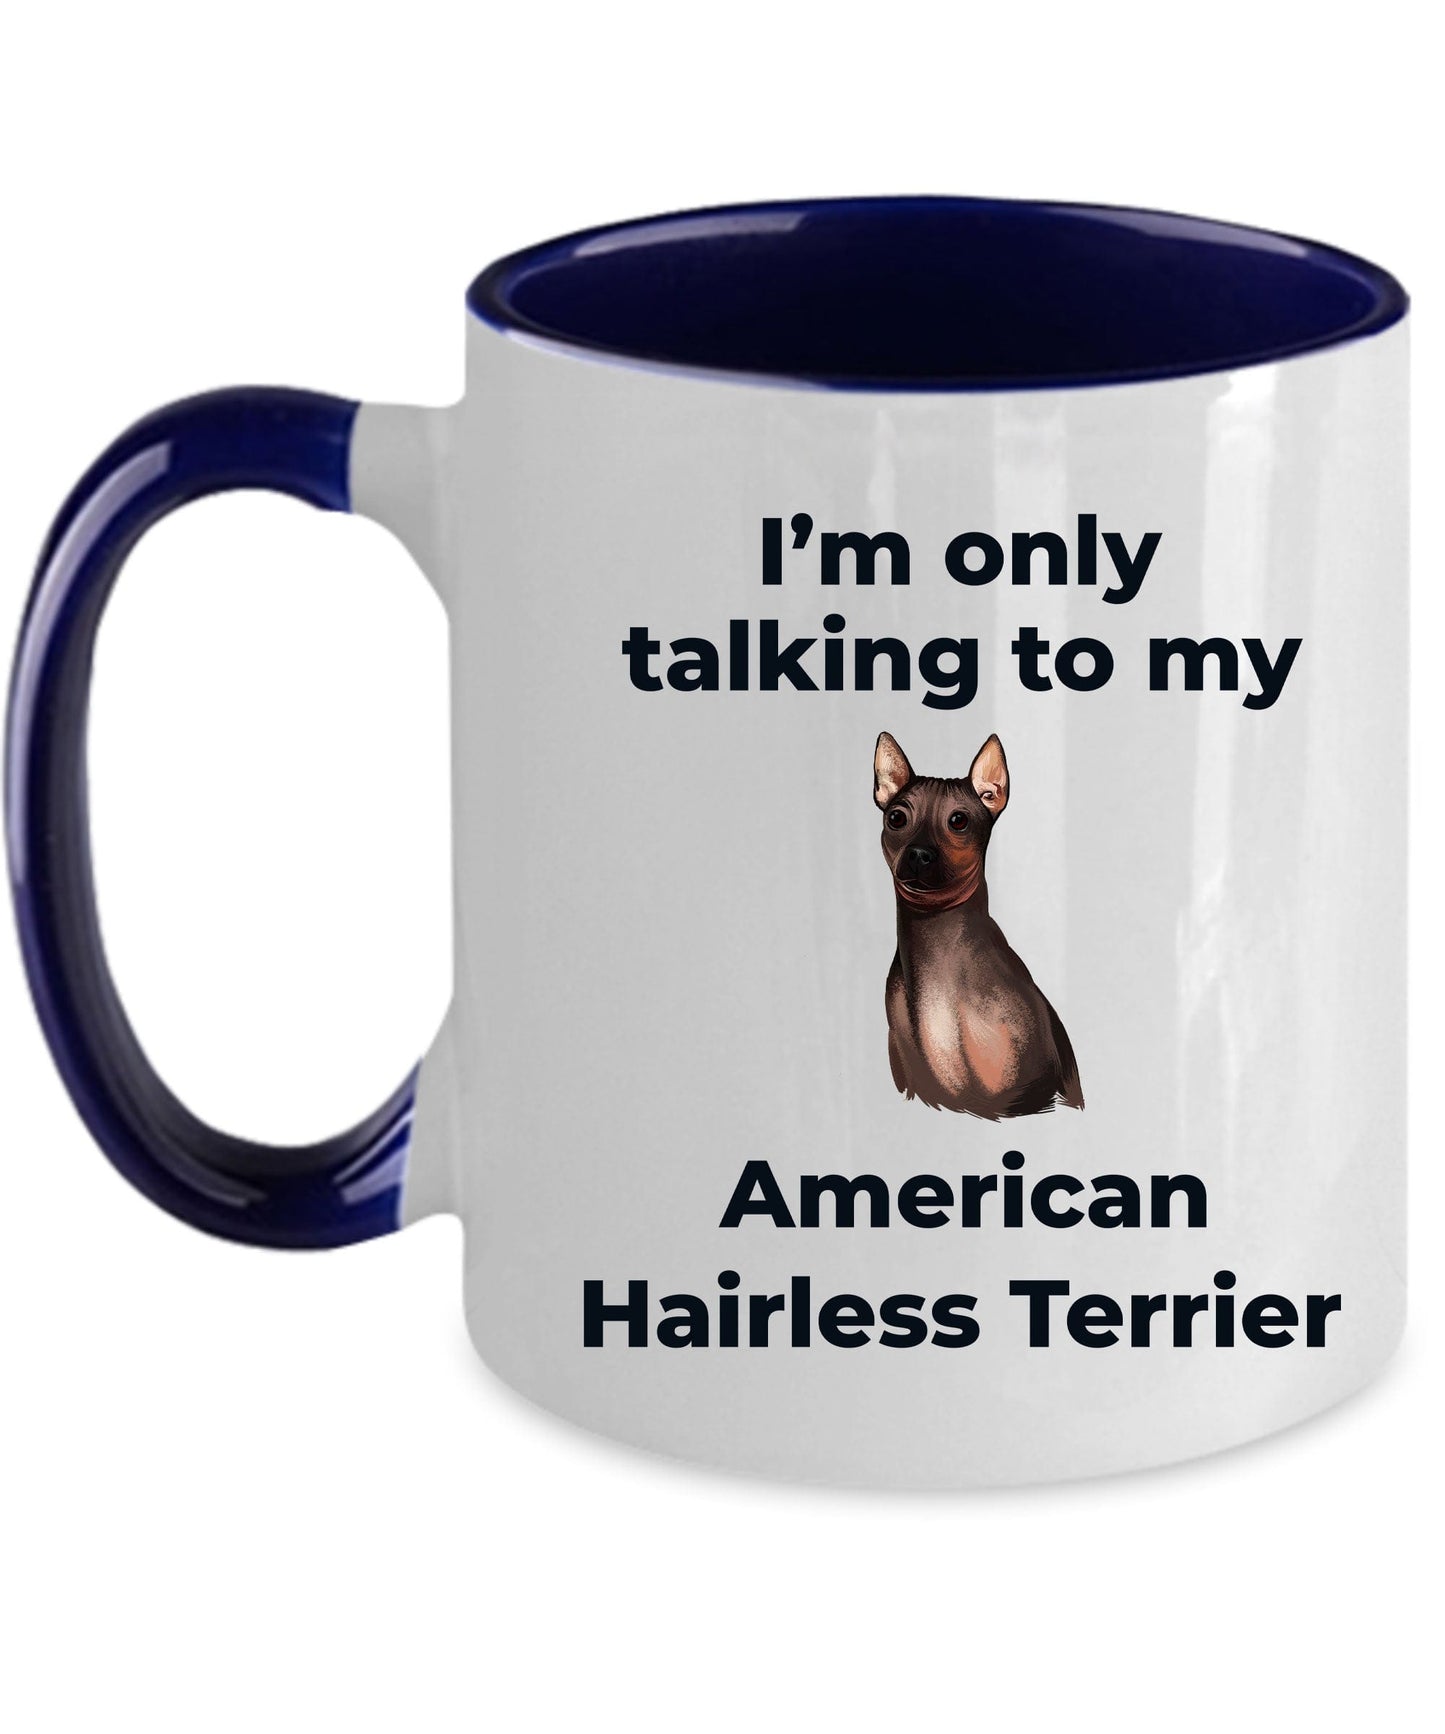 American Hairless Terrier Coffee Mug - I'm only talking to my American Hairless Terrier